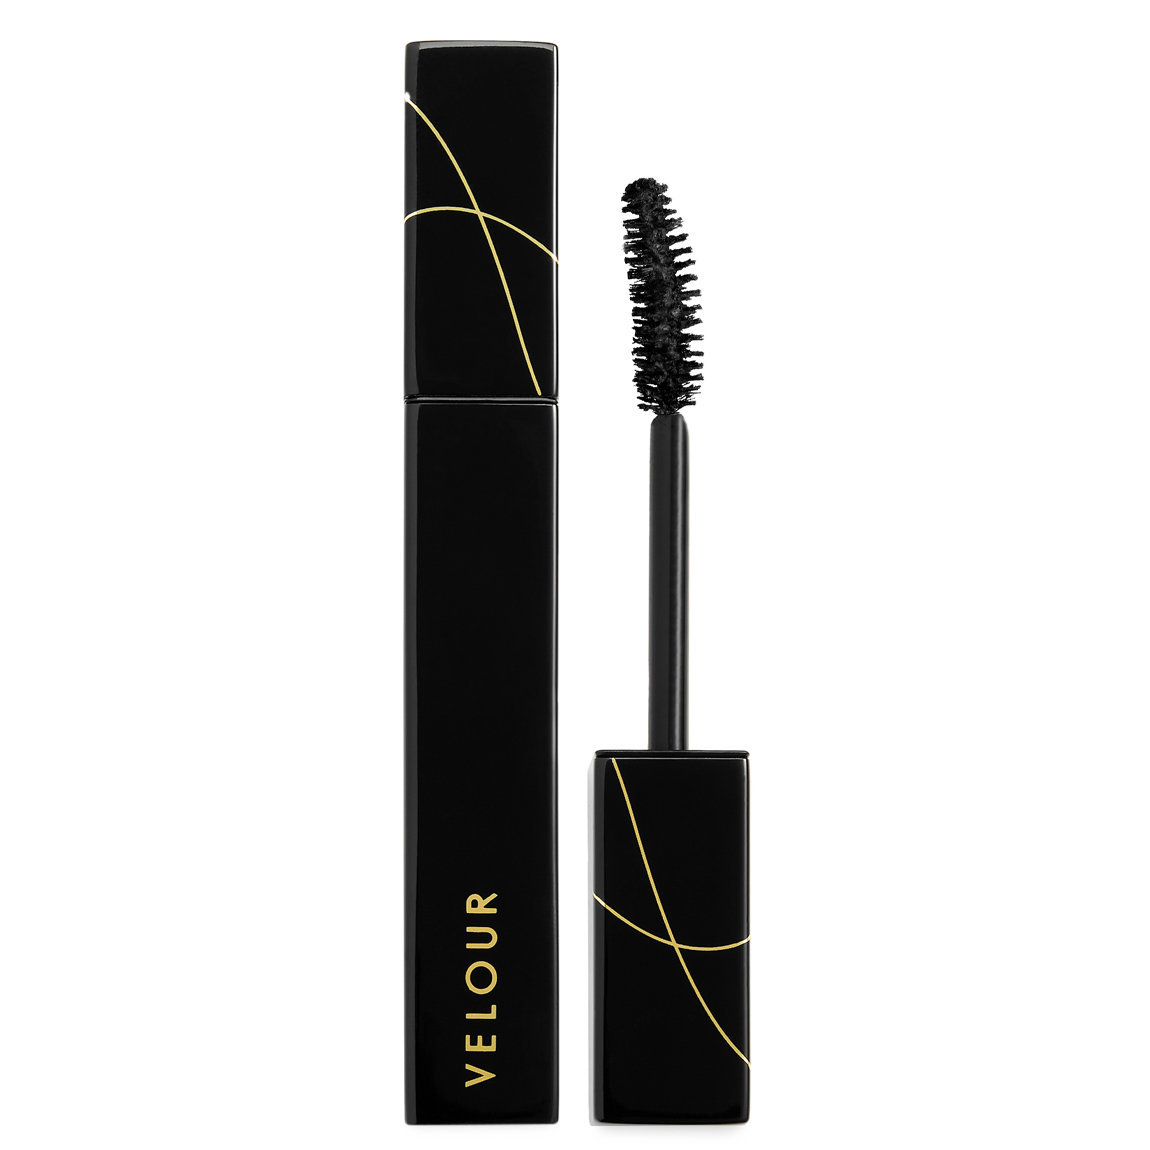 Velour Beauty Pretty Big Deal Mascara alternative view 1 - product swatch.